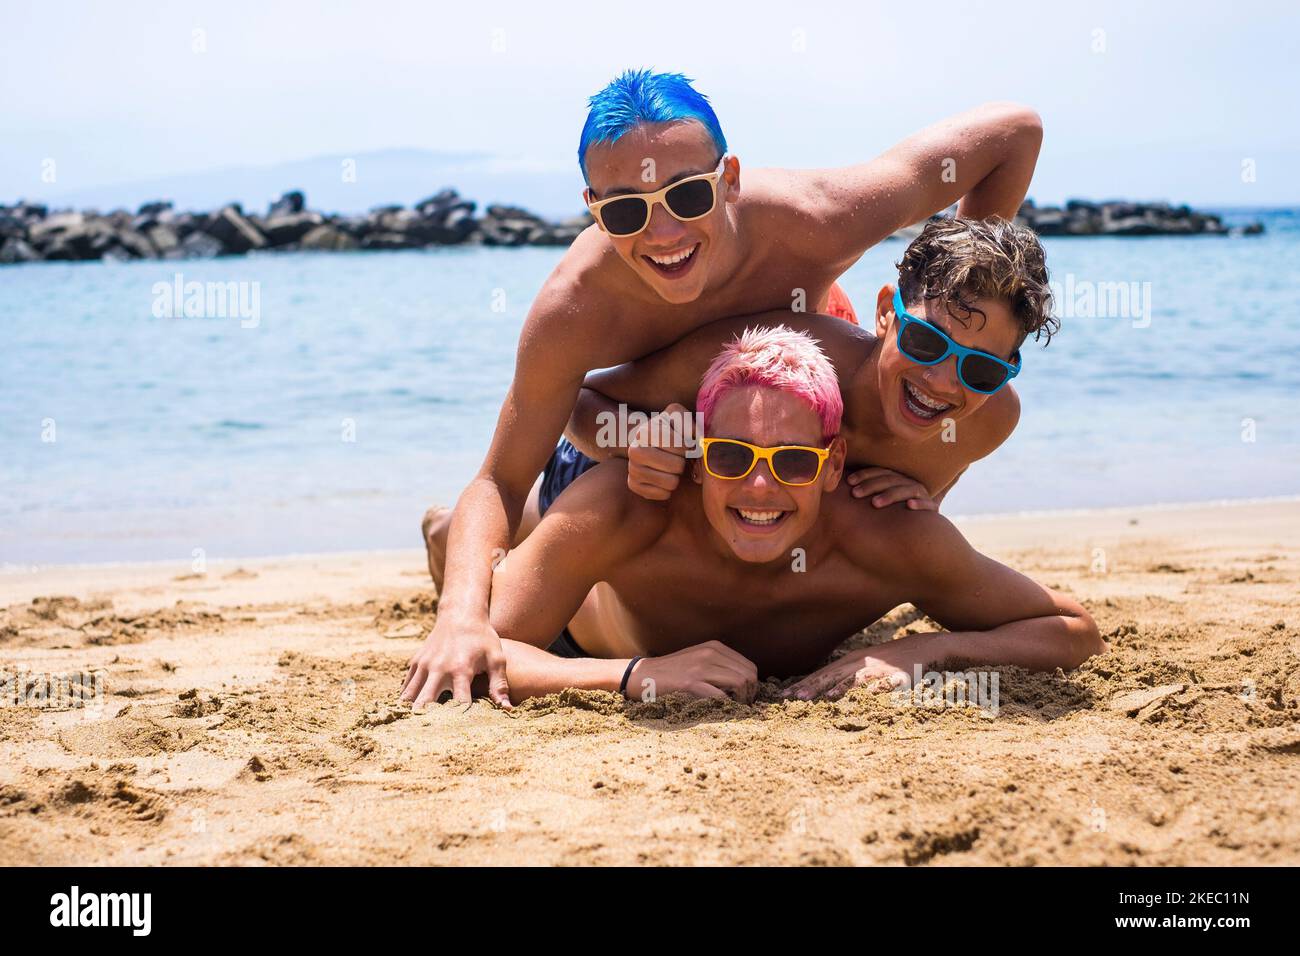 group of three friends having fun playing and enjoying together at the beach wearinng sunglasses laughing smiling and looking at the camera - teenager with different colors of hair enjoying summer and vacations Stock Photo